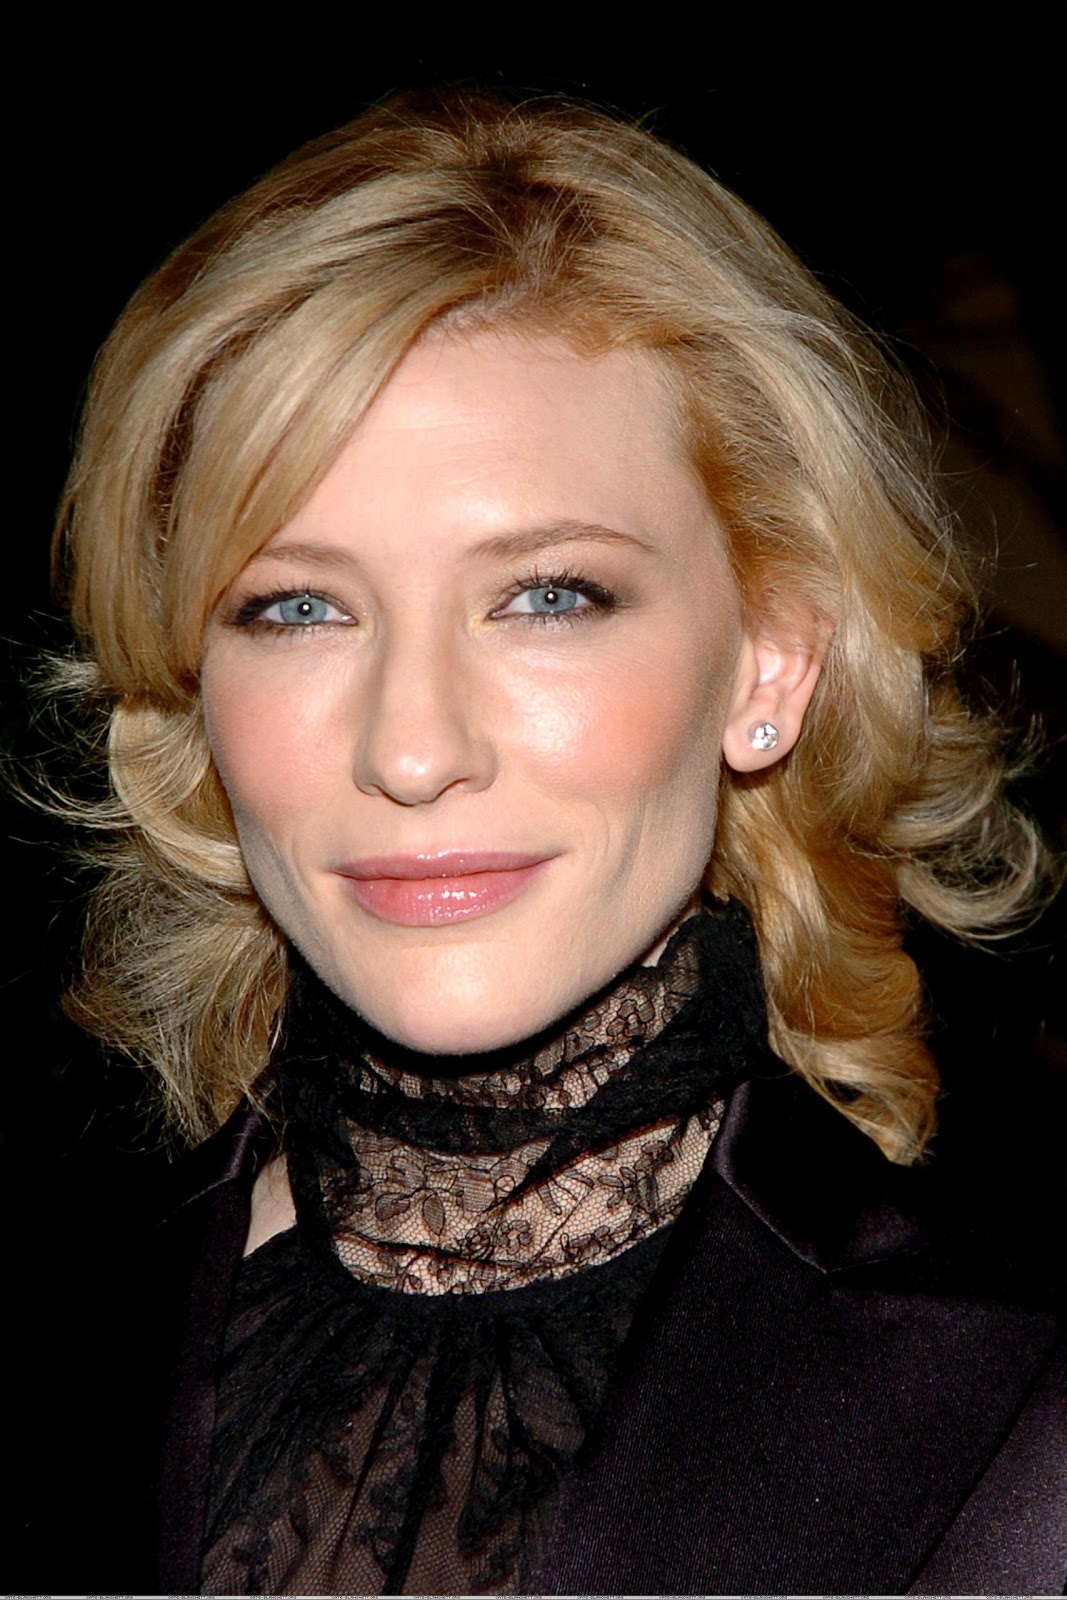 Sexy Photos Of Cate Blanchett Full Hot Hd Wallpapers And Pictures Gallery Porn Sex Picture